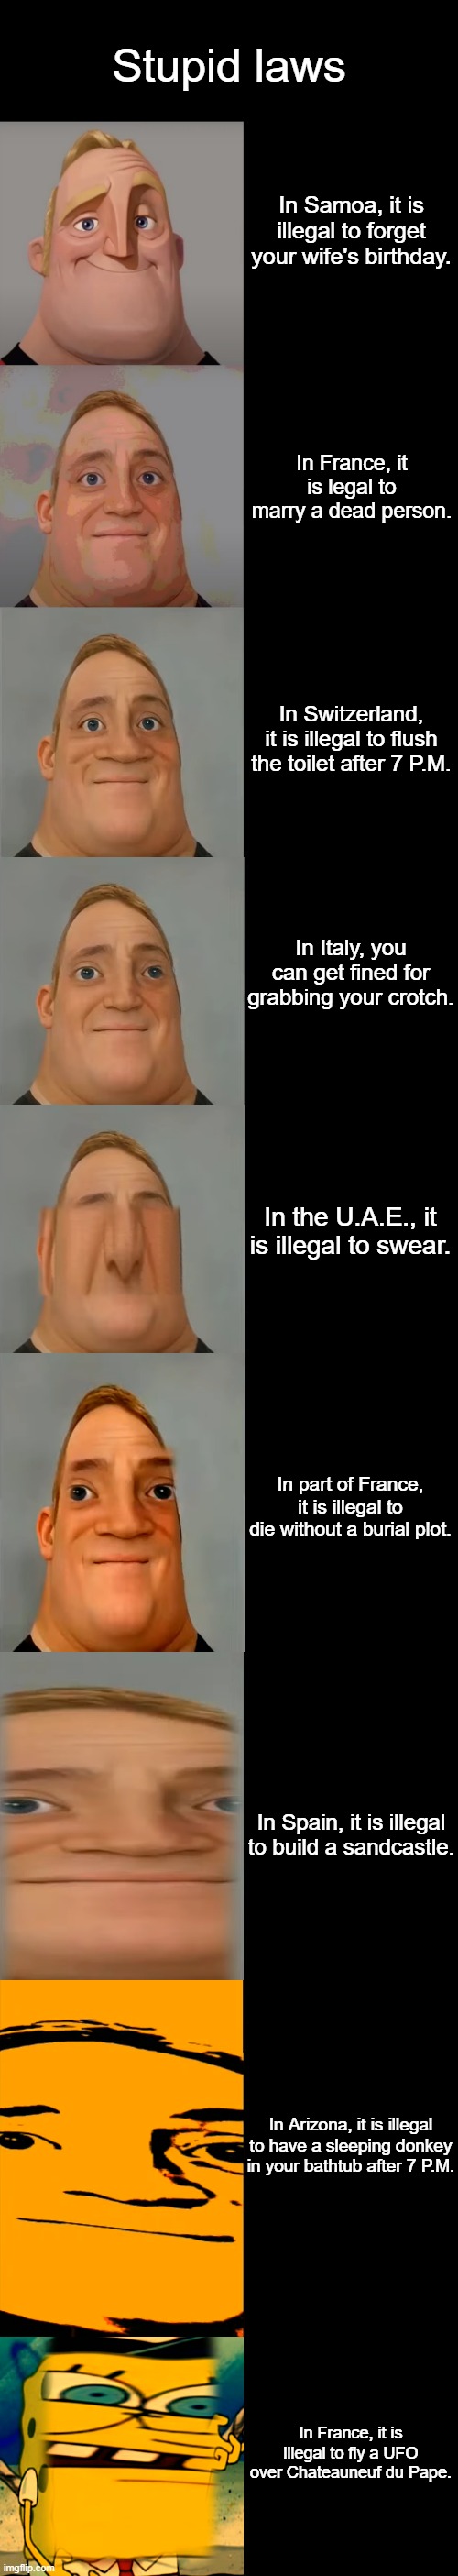 Mr Incredible becoming Idiot template | Stupid laws; In Samoa, it is illegal to forget your wife's birthday. In France, it is legal to marry a dead person. In Switzerland, it is illegal to flush the toilet after 7 P.M. In Italy, you can get fined for grabbing your crotch. In the U.A.E., it is illegal to swear. In part of France, it is illegal to die without a burial plot. In Spain, it is illegal to build a sandcastle. In Arizona, it is illegal to have a sleeping donkey in your bathtub after 7 P.M. In France, it is illegal to fly a UFO over Chateauneuf du Pape. | image tagged in mr incredible becoming idiot template | made w/ Imgflip meme maker